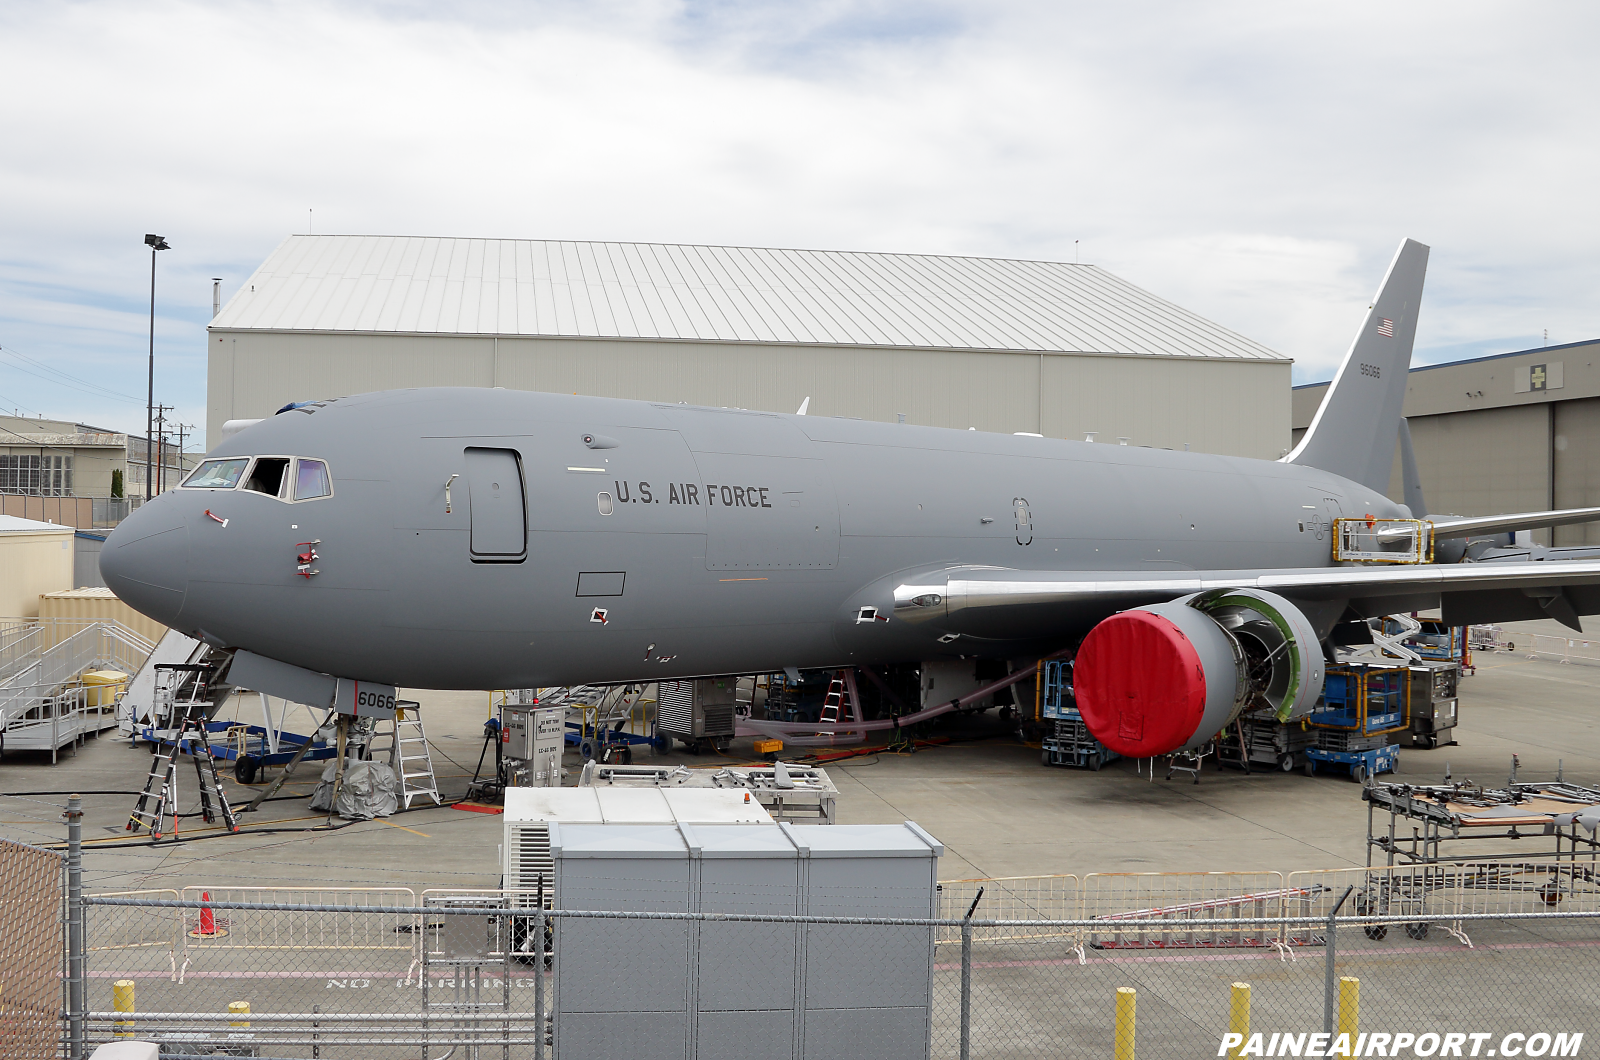 KC-46A 19-46066 at KPAE Paine Field September 3, 2021.